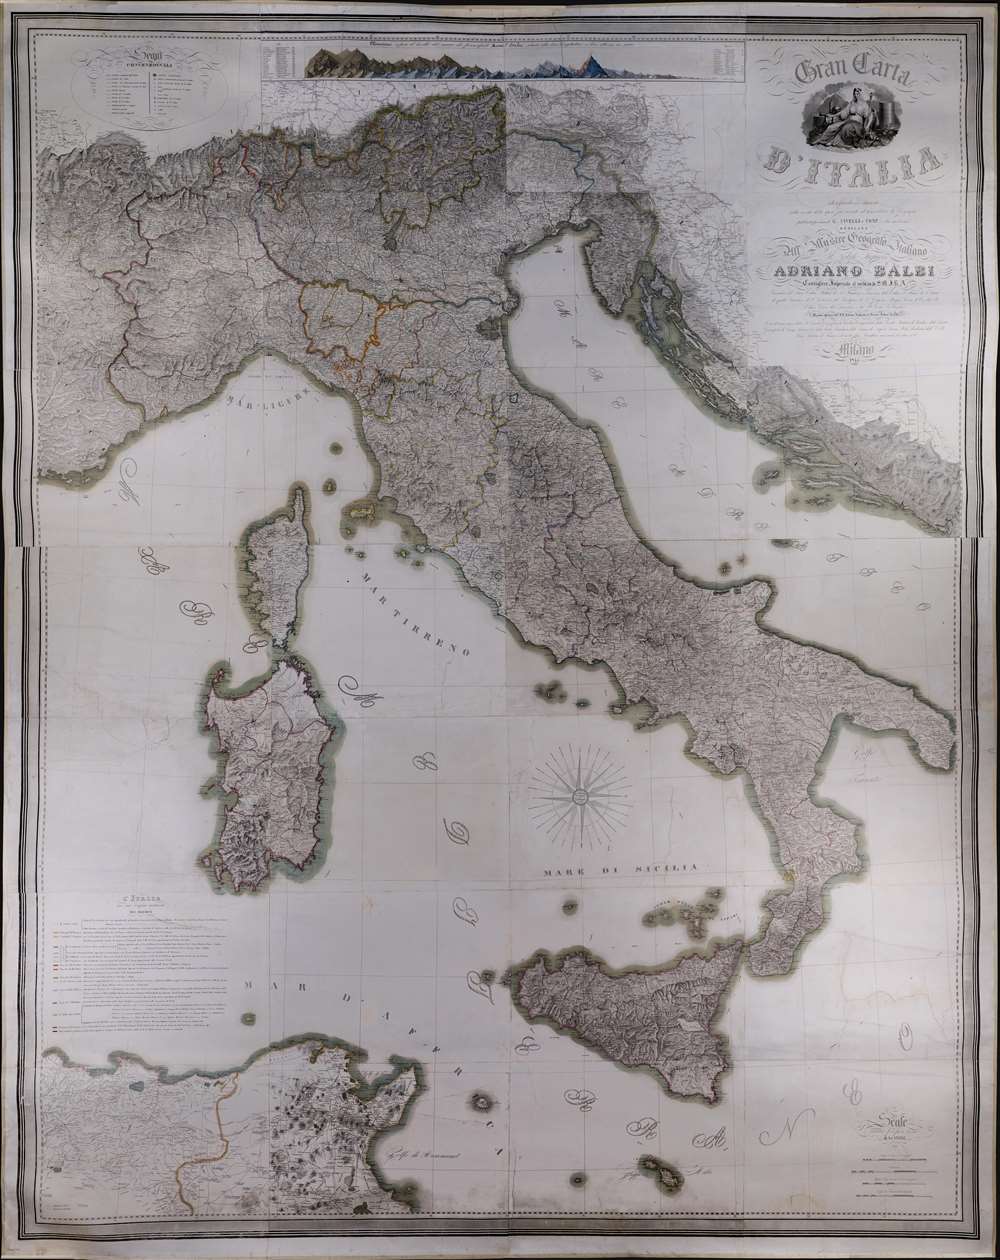 1845 'Ginormous' Civelli Wall / Case Map of Italy